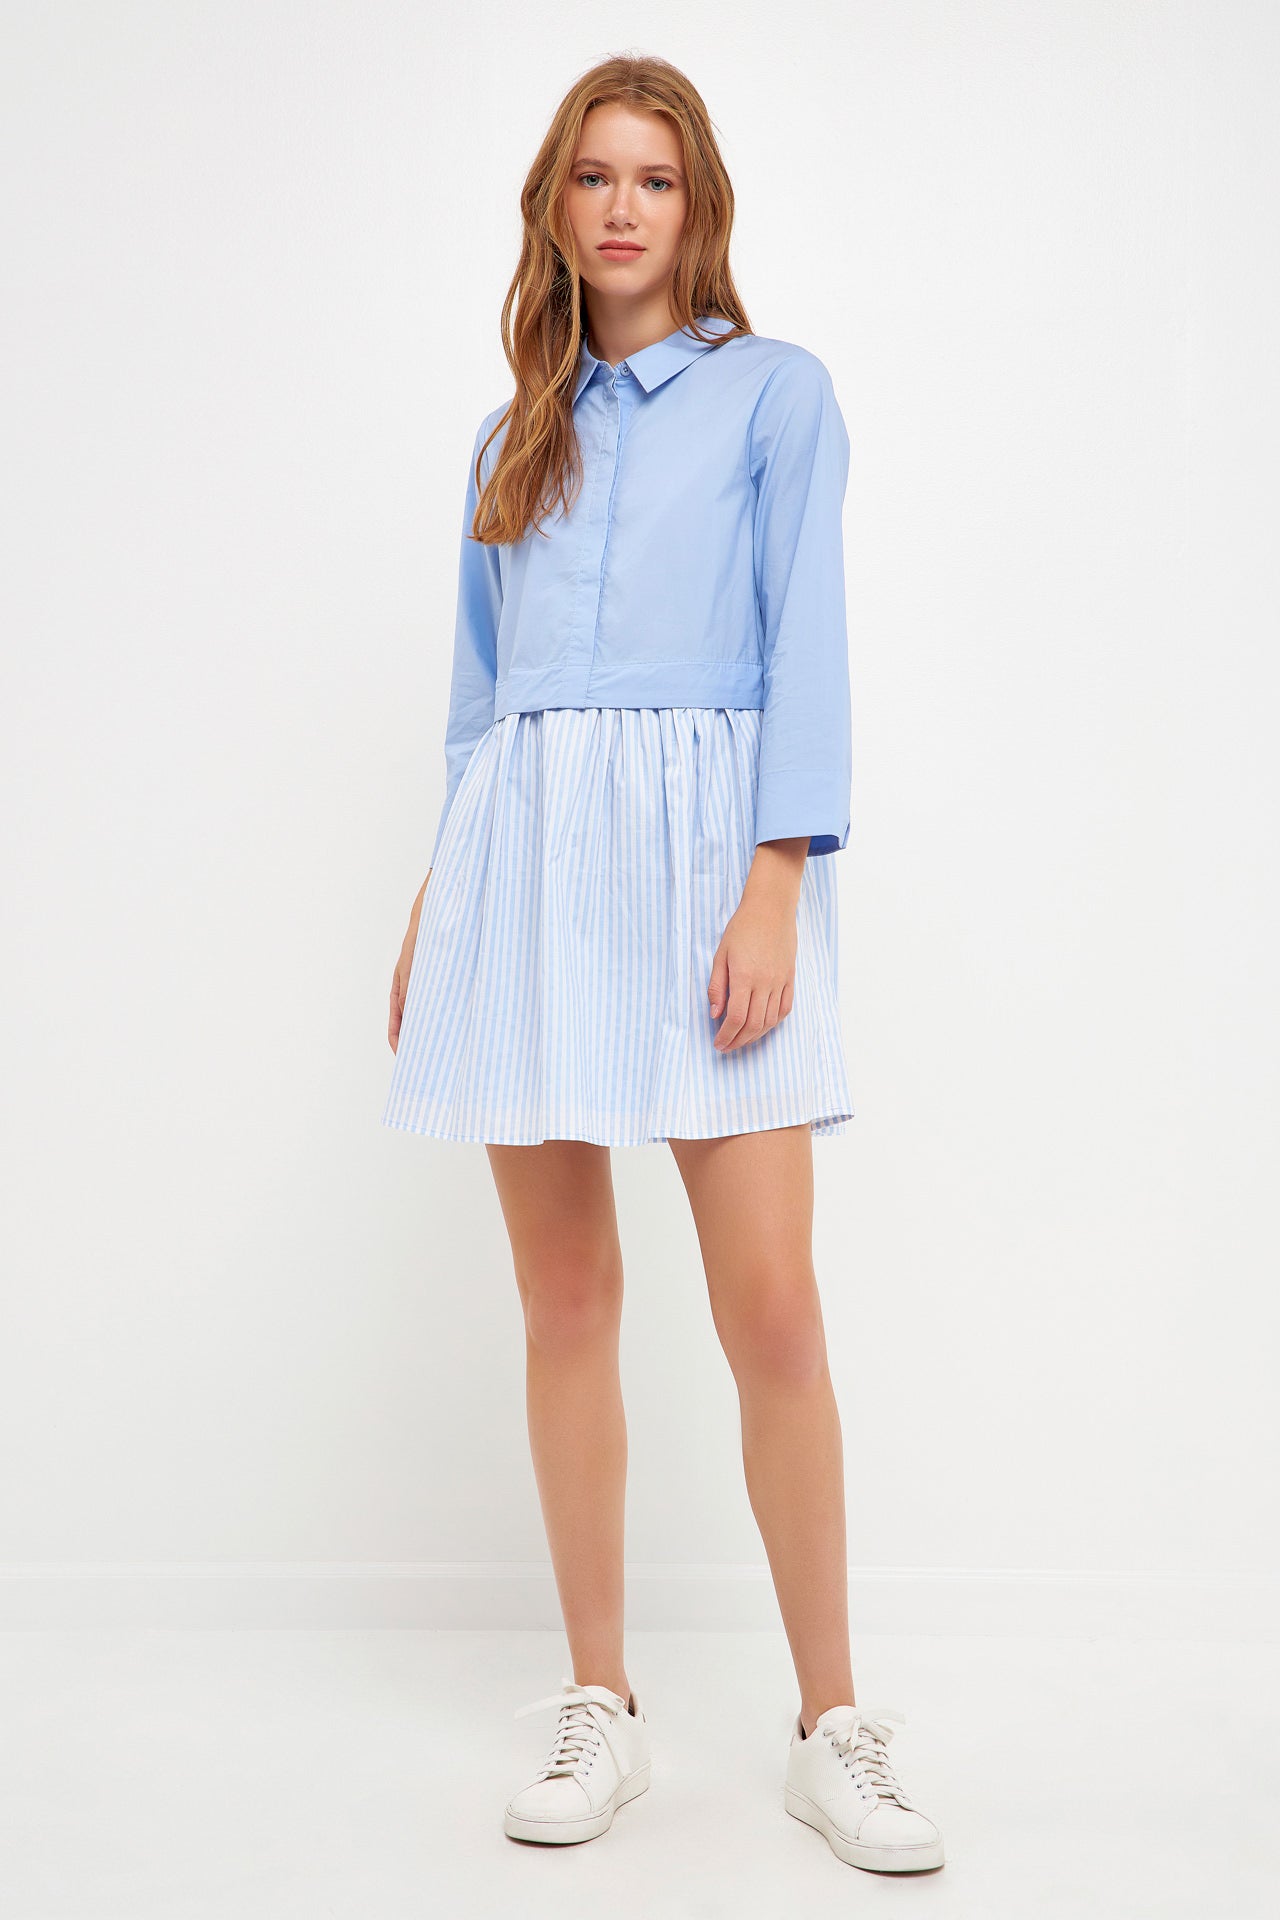 ENGLISH FACTORY-Stripe Contrast Shirt Mini Dress-DRESSES available at Objectrare